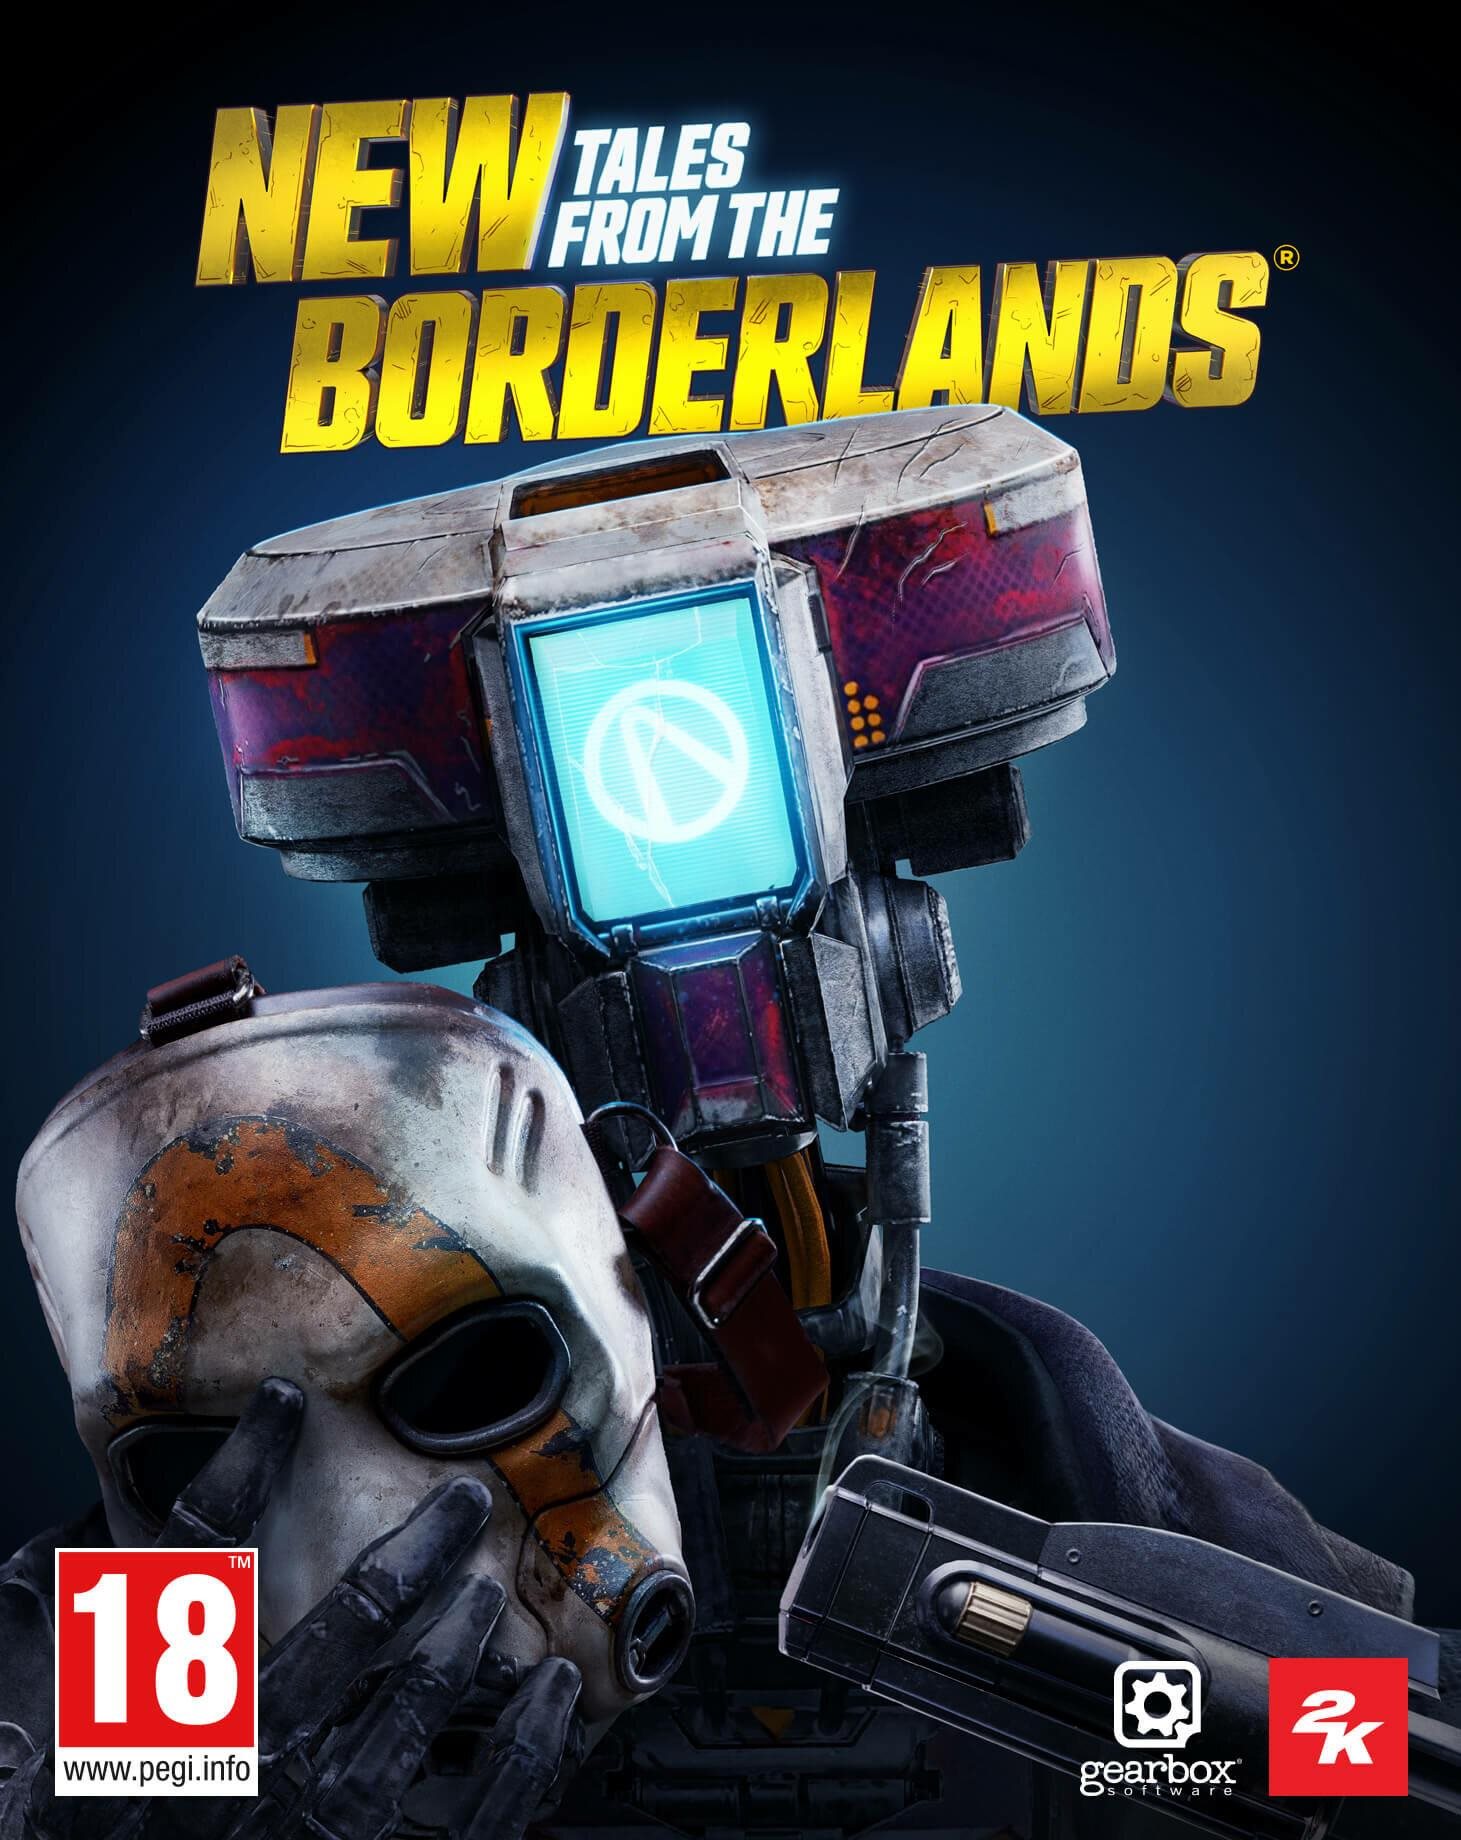 New Tales from the Borderlands - PC DIGITAL